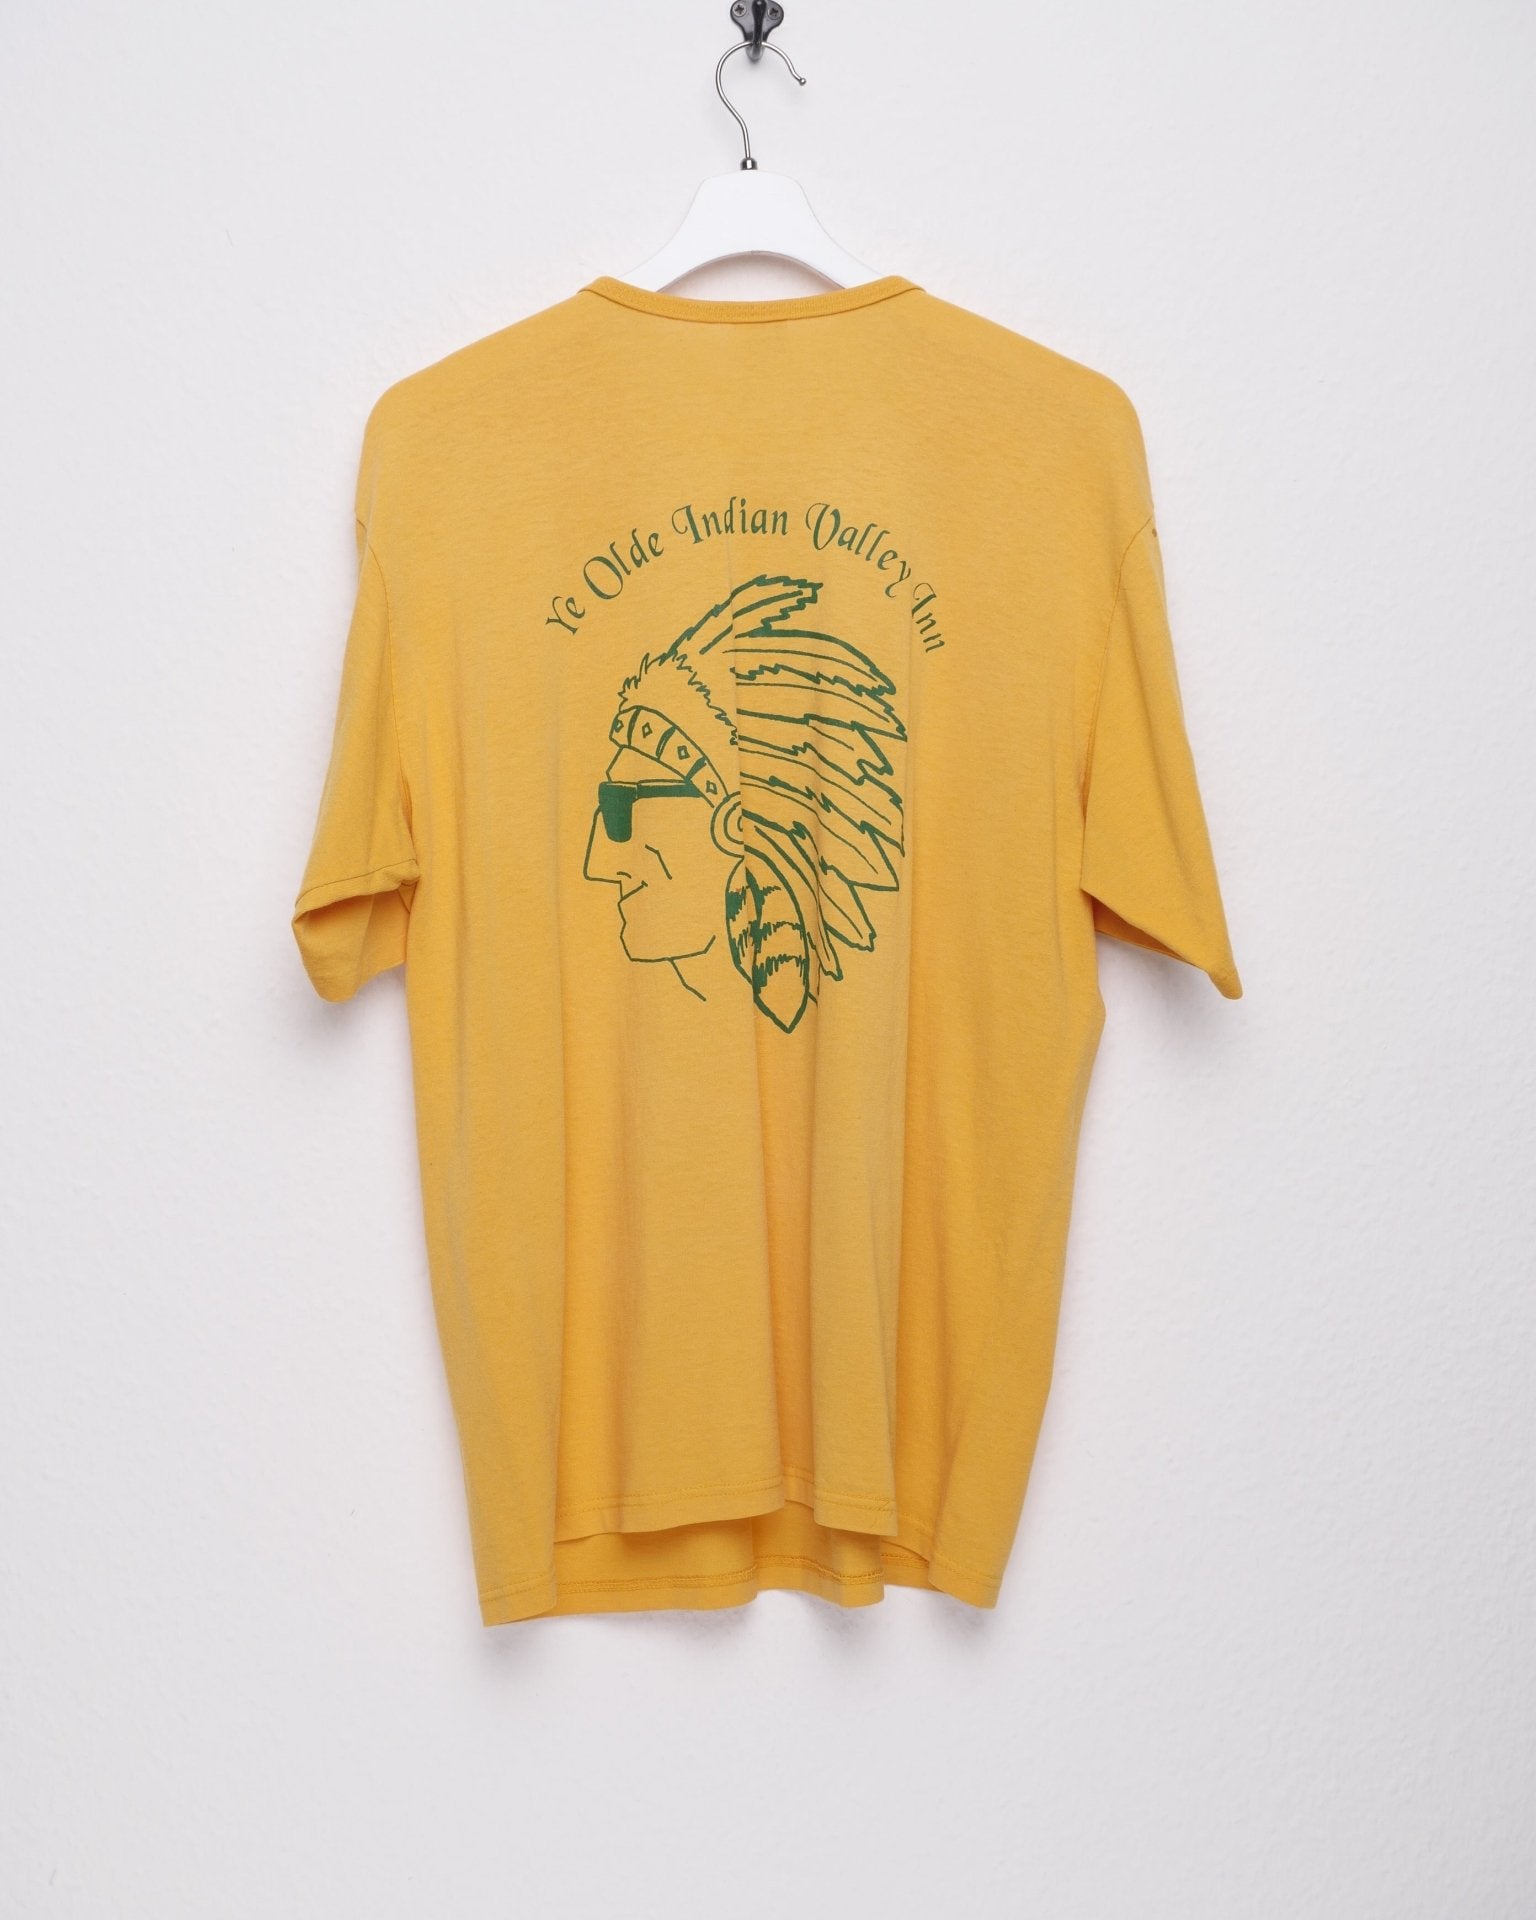 Ye Olde Indian Valley Inn printed Graphic yellow Shirt - Peeces